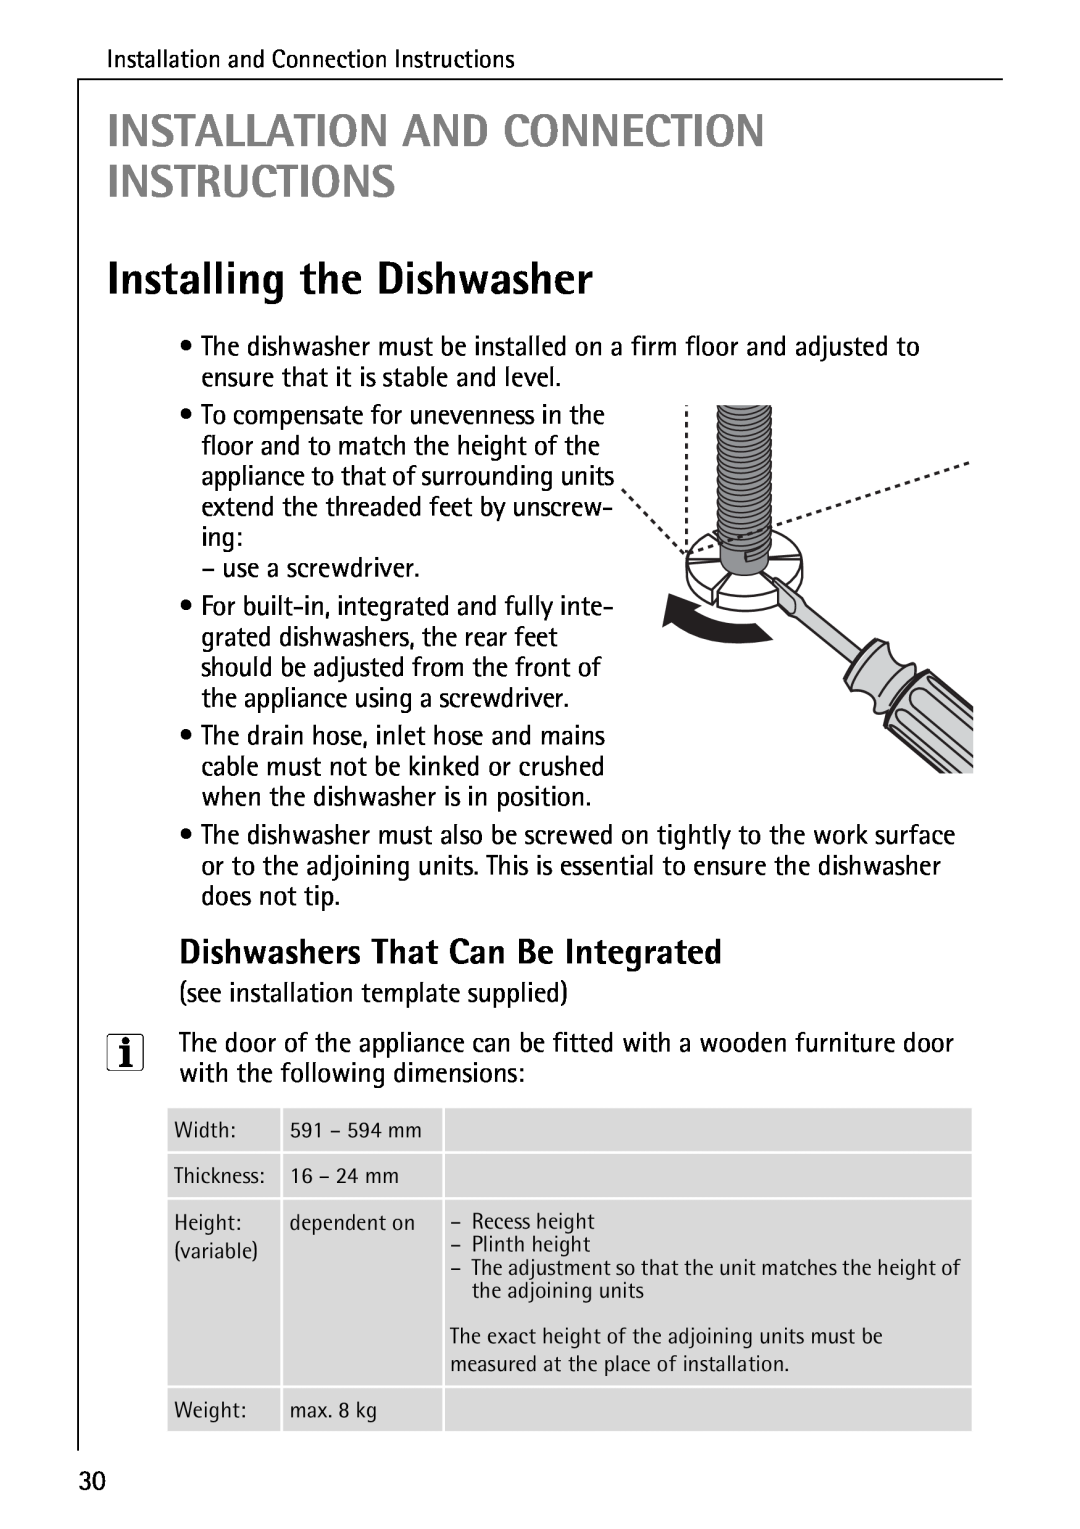 AEG 40260 I manual Installation And Connection Instructions, Installing the Dishwasher, Dishwashers That Can Be Integrated 